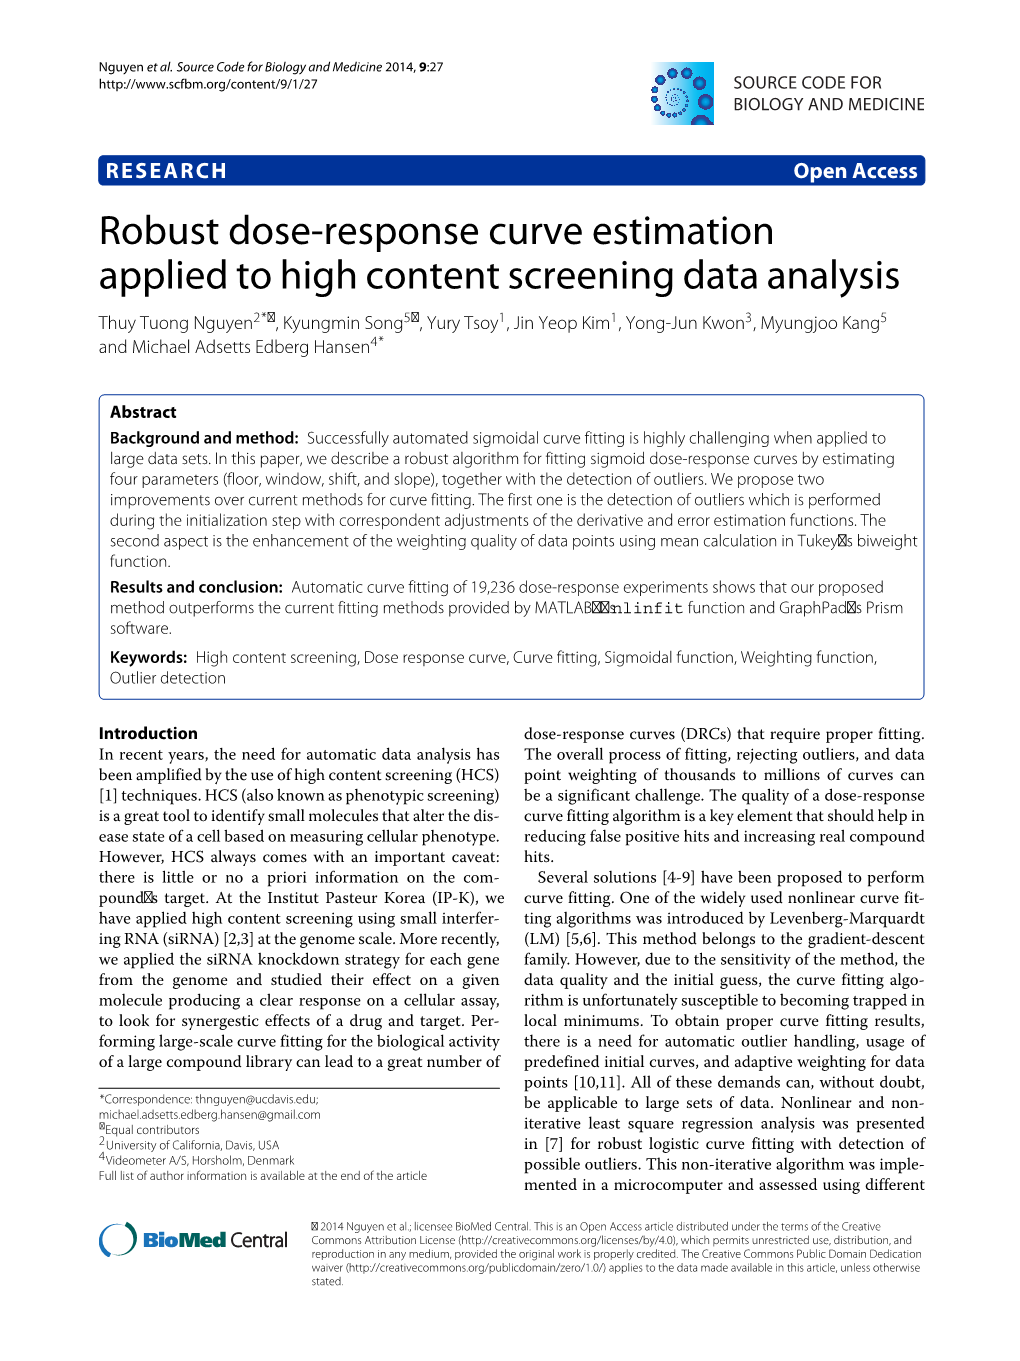 Robust Dose-Response Curve Estimation Applied to High Content